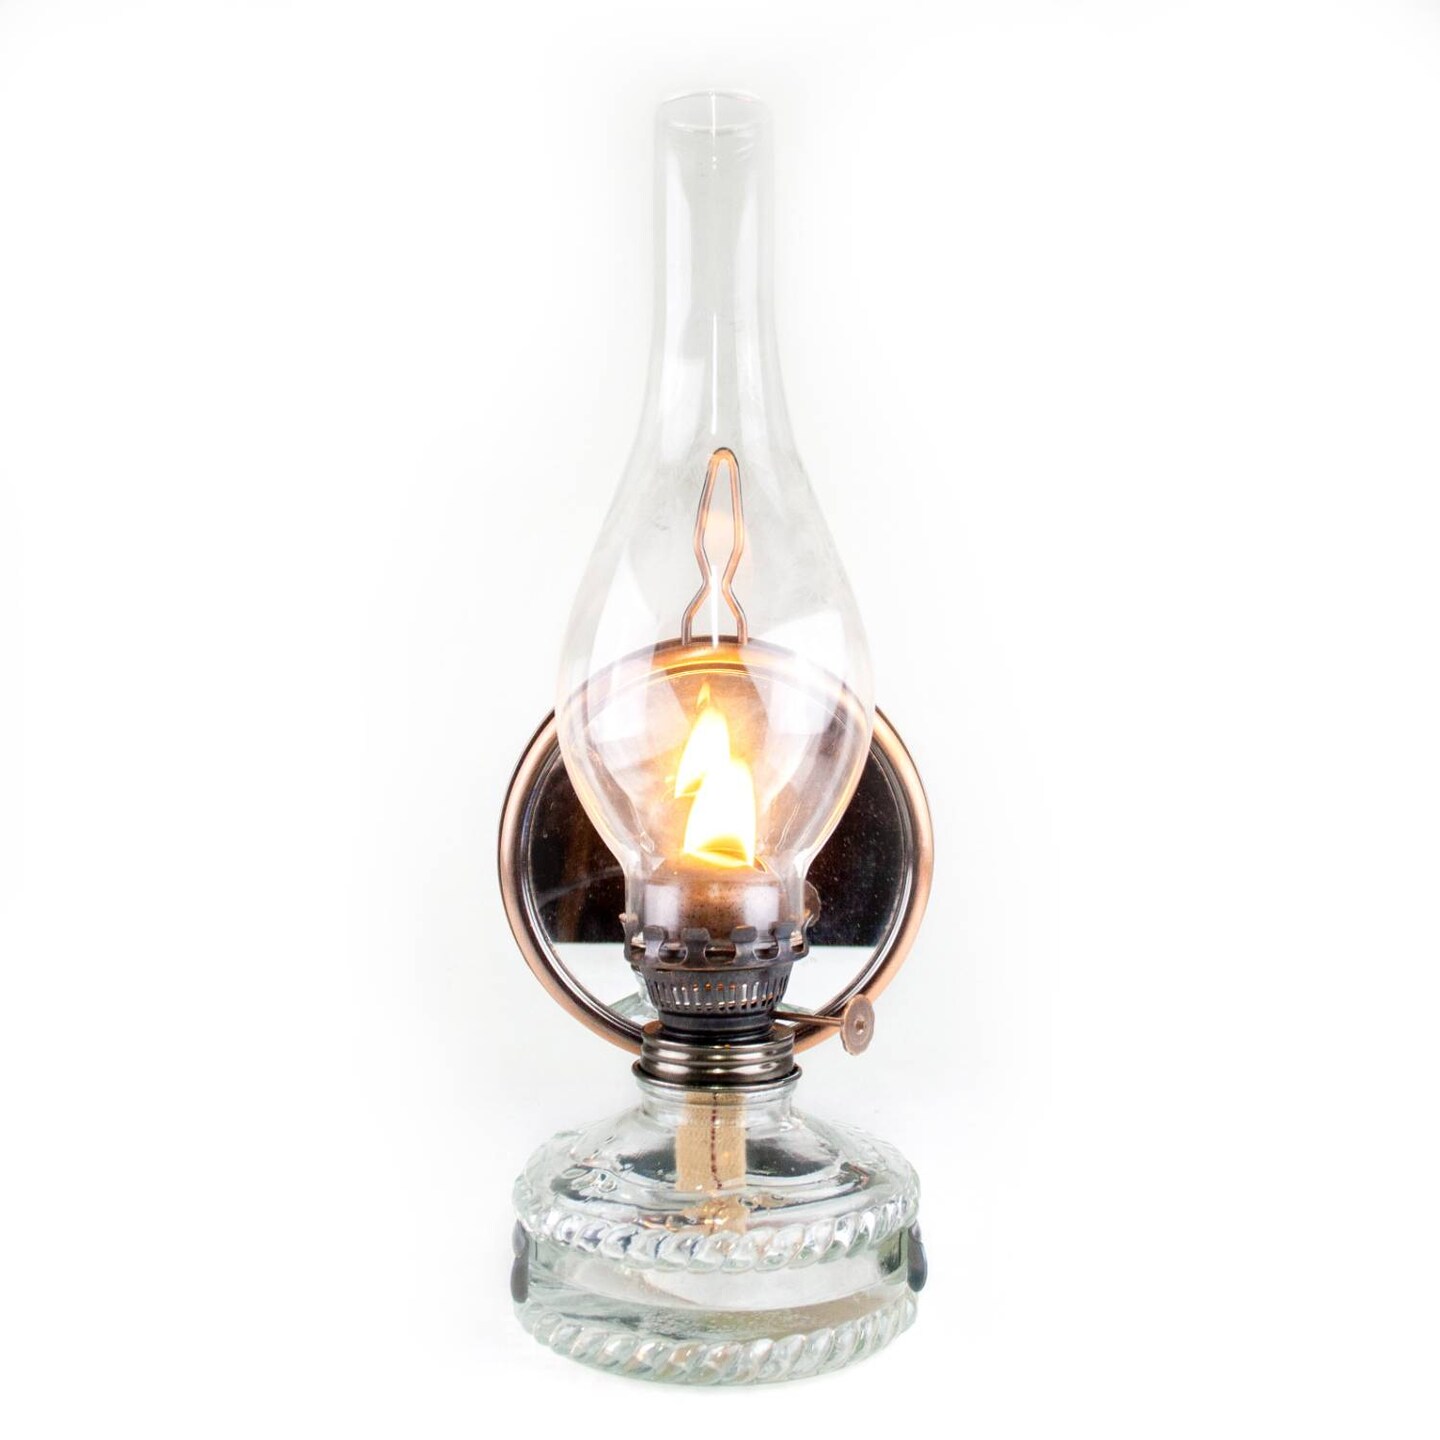 Lehman's Oil Lamp with Reflector - Securely Mounts to Wall or Can